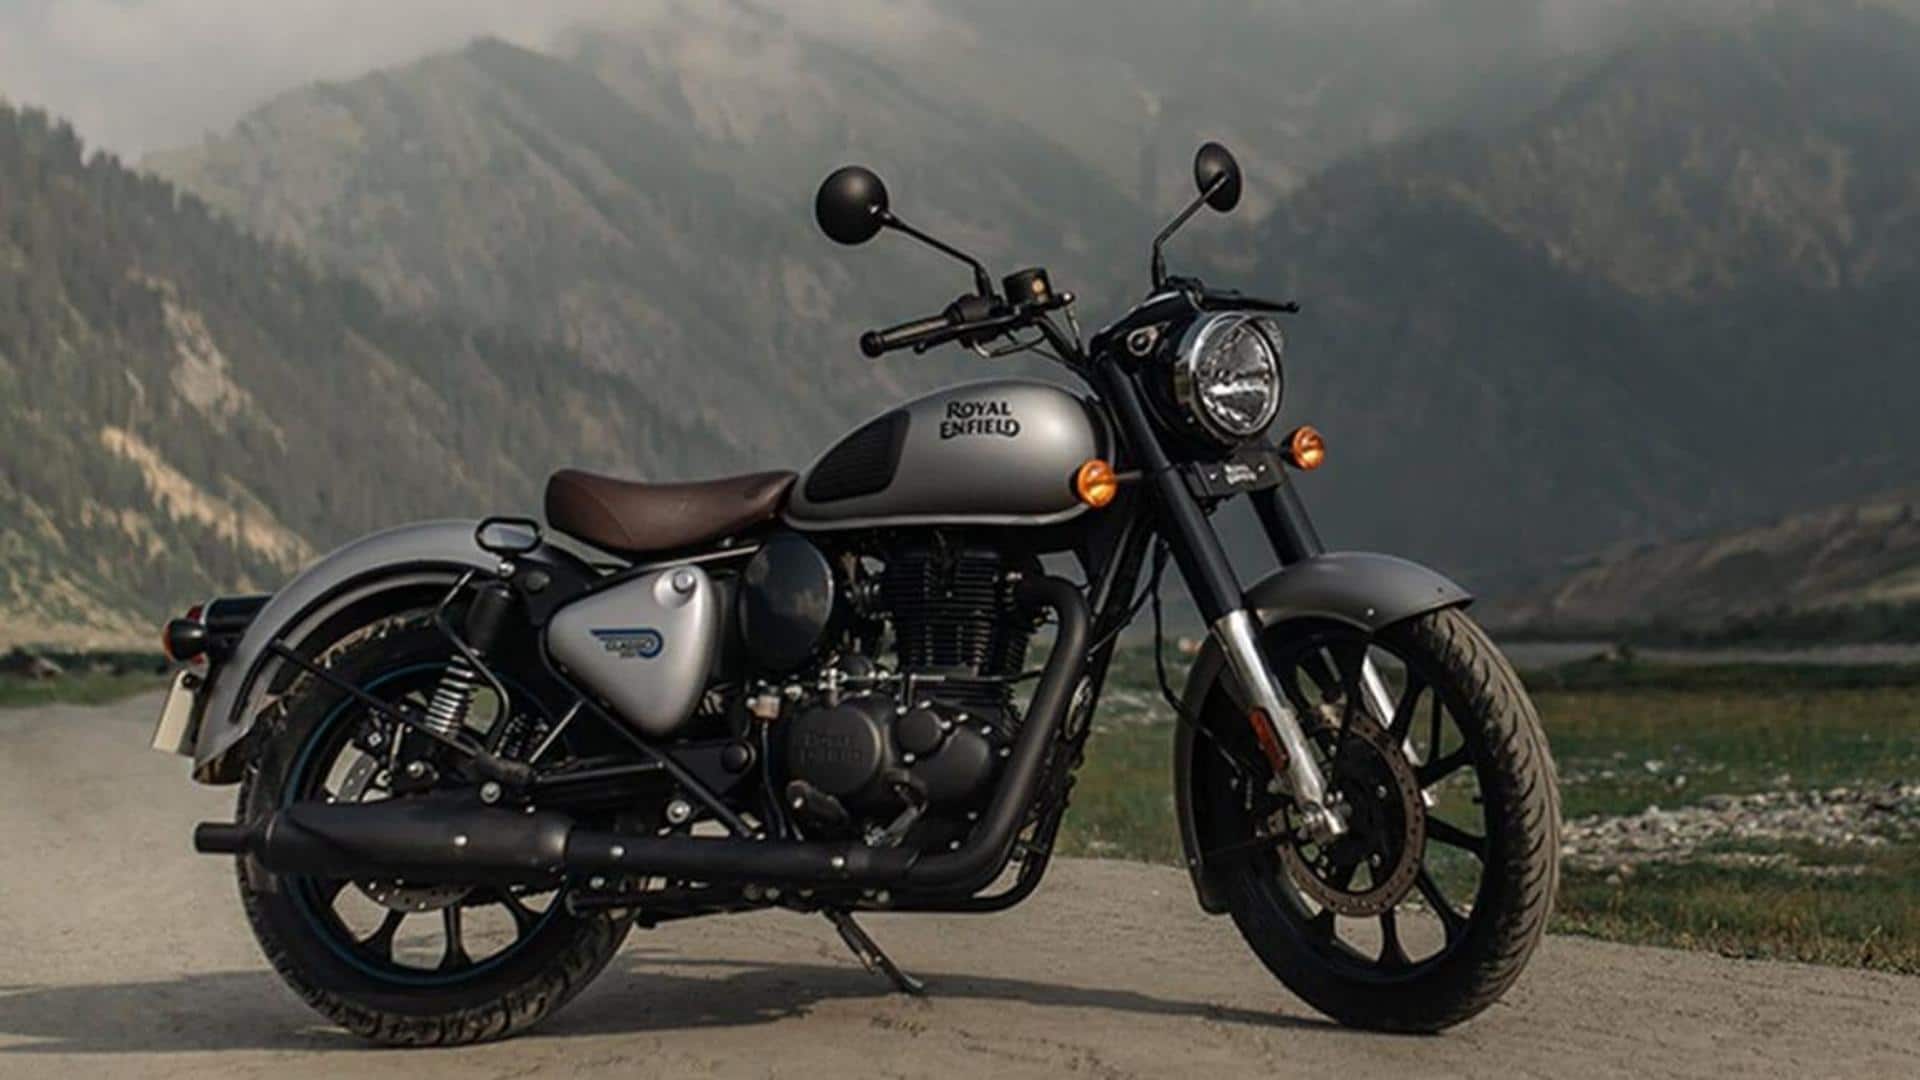 Upgrading from Royal Enfield Classic 350: Check best options